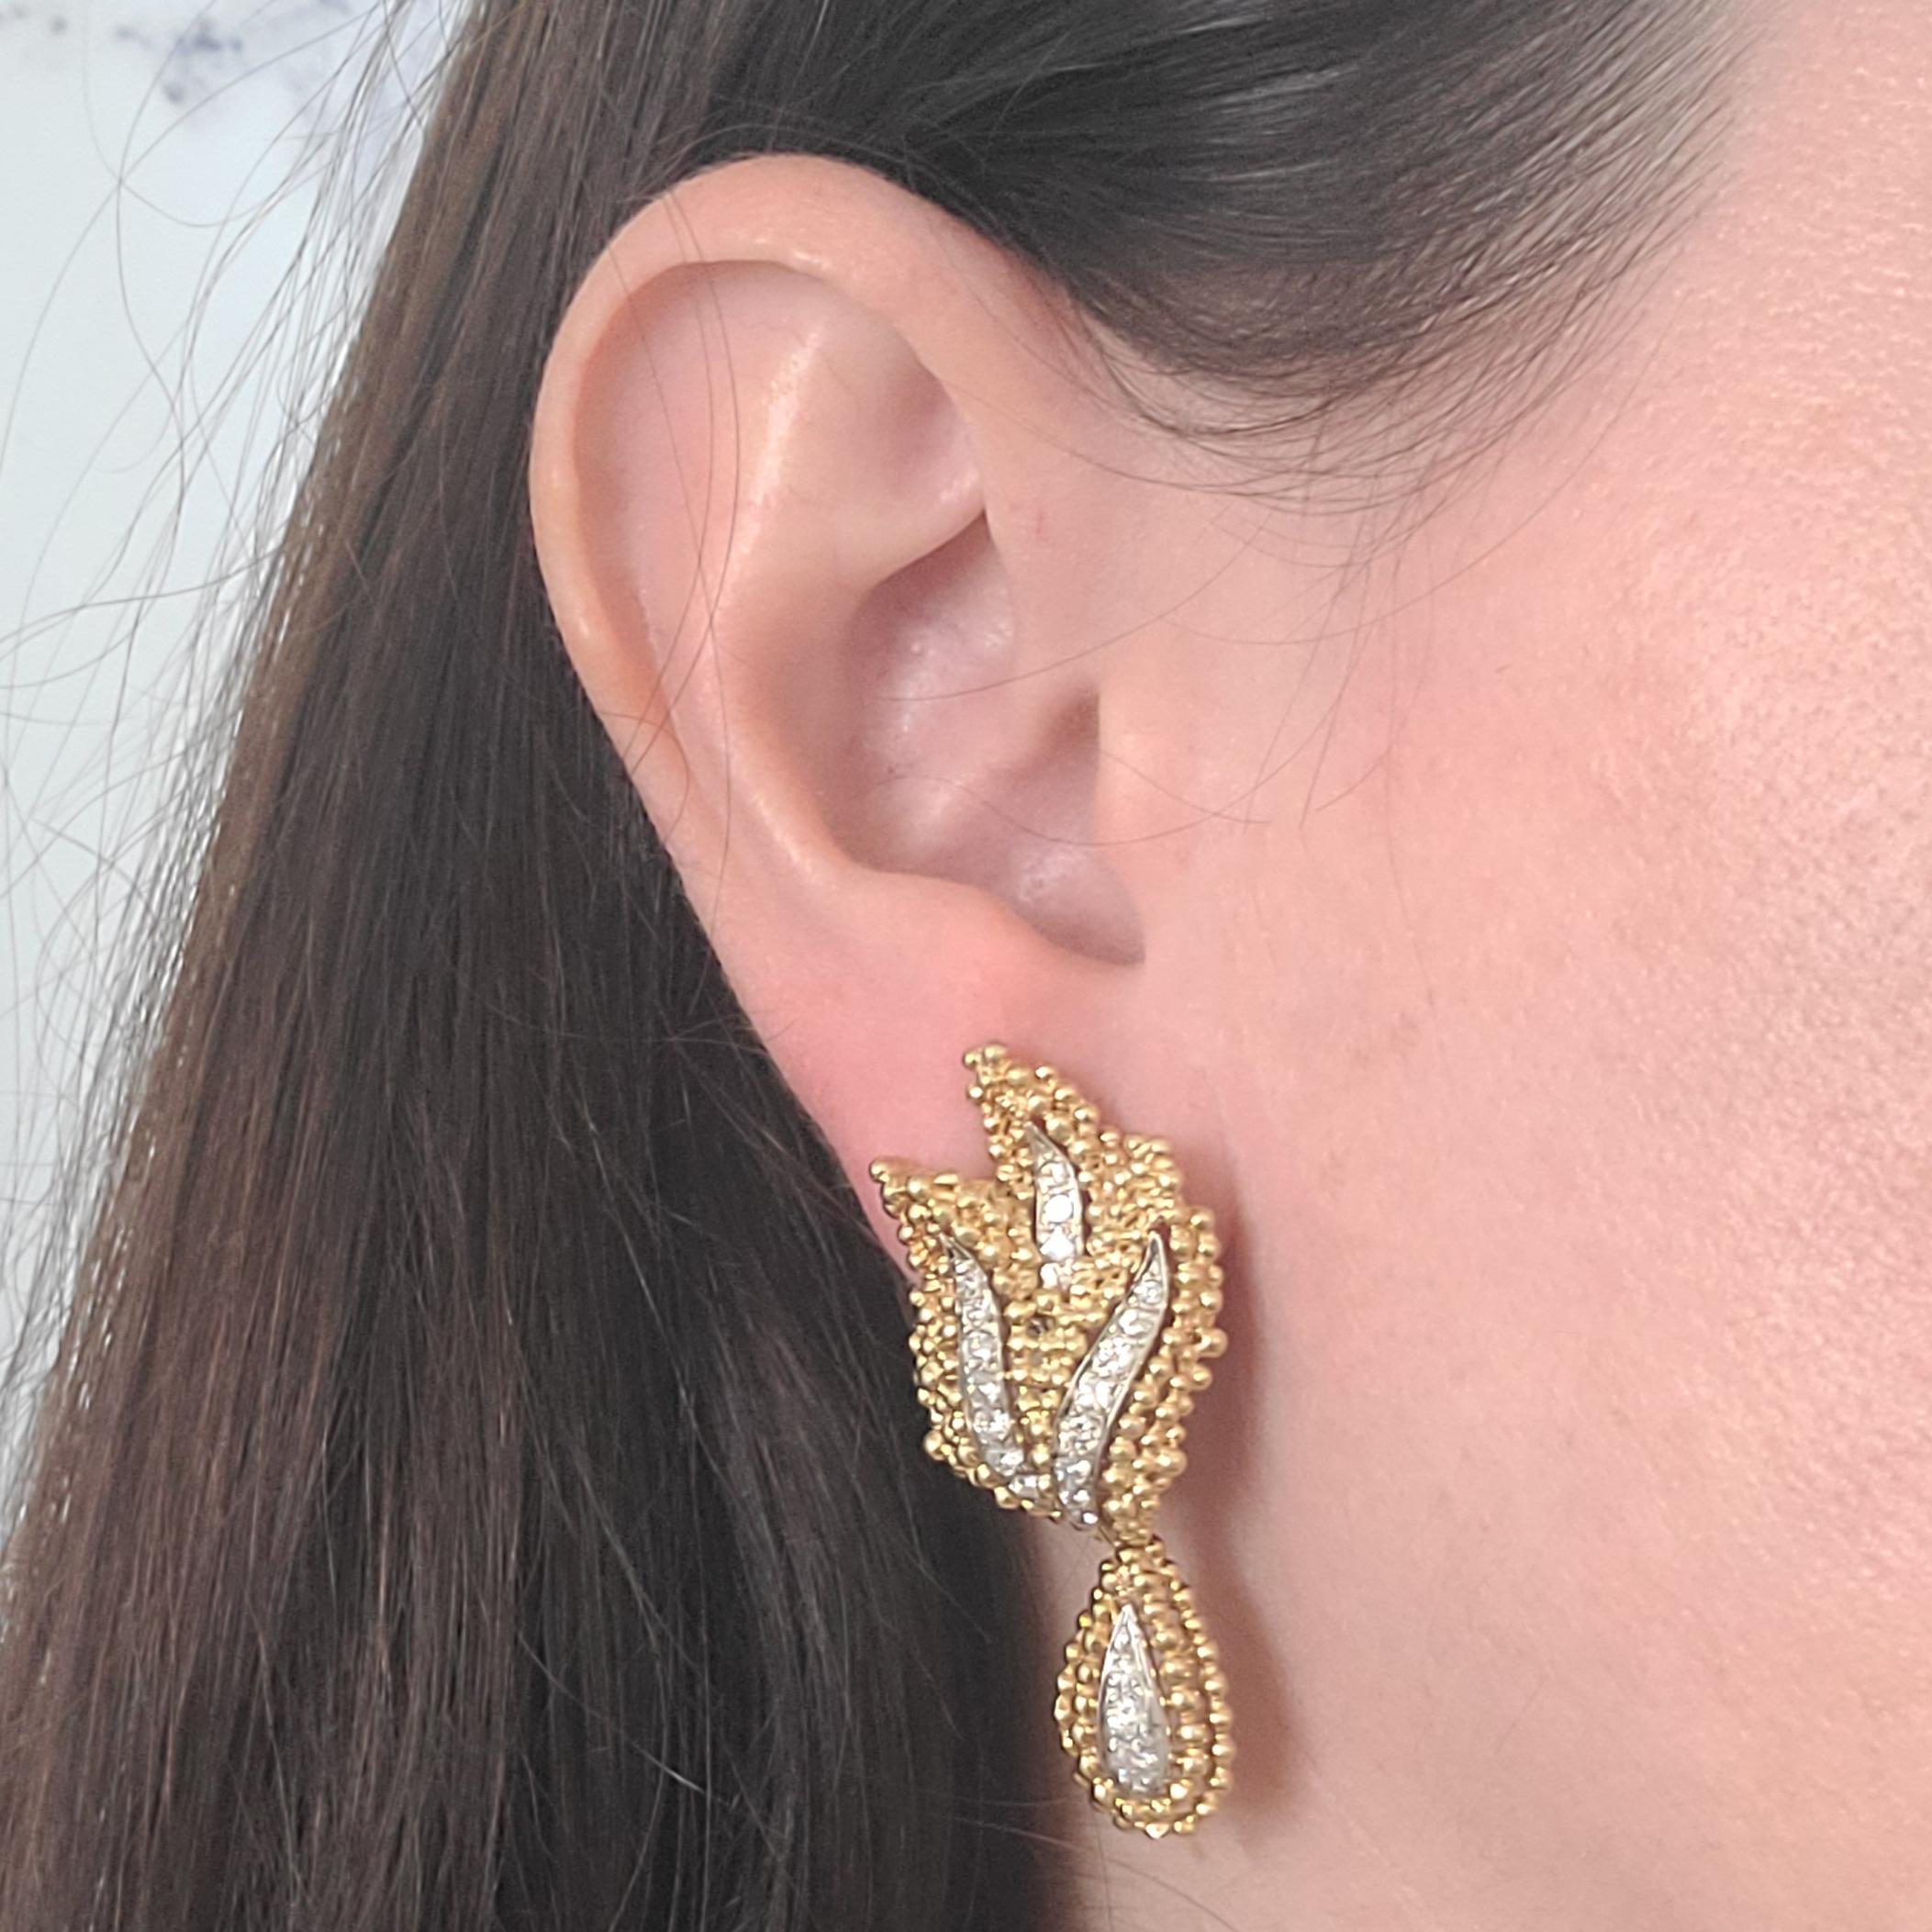 18 Karat Yellow Gold Winged Earrings With Dangling Drop Featuring 42 Round Brilliant Cut Diamonds Of VS Clarity & G Color Totaling Approximately 1.00 Carat. Pierced Post With Omega Clip Back; Post Can Be Removed Upon Request. Finished Weight Is 20